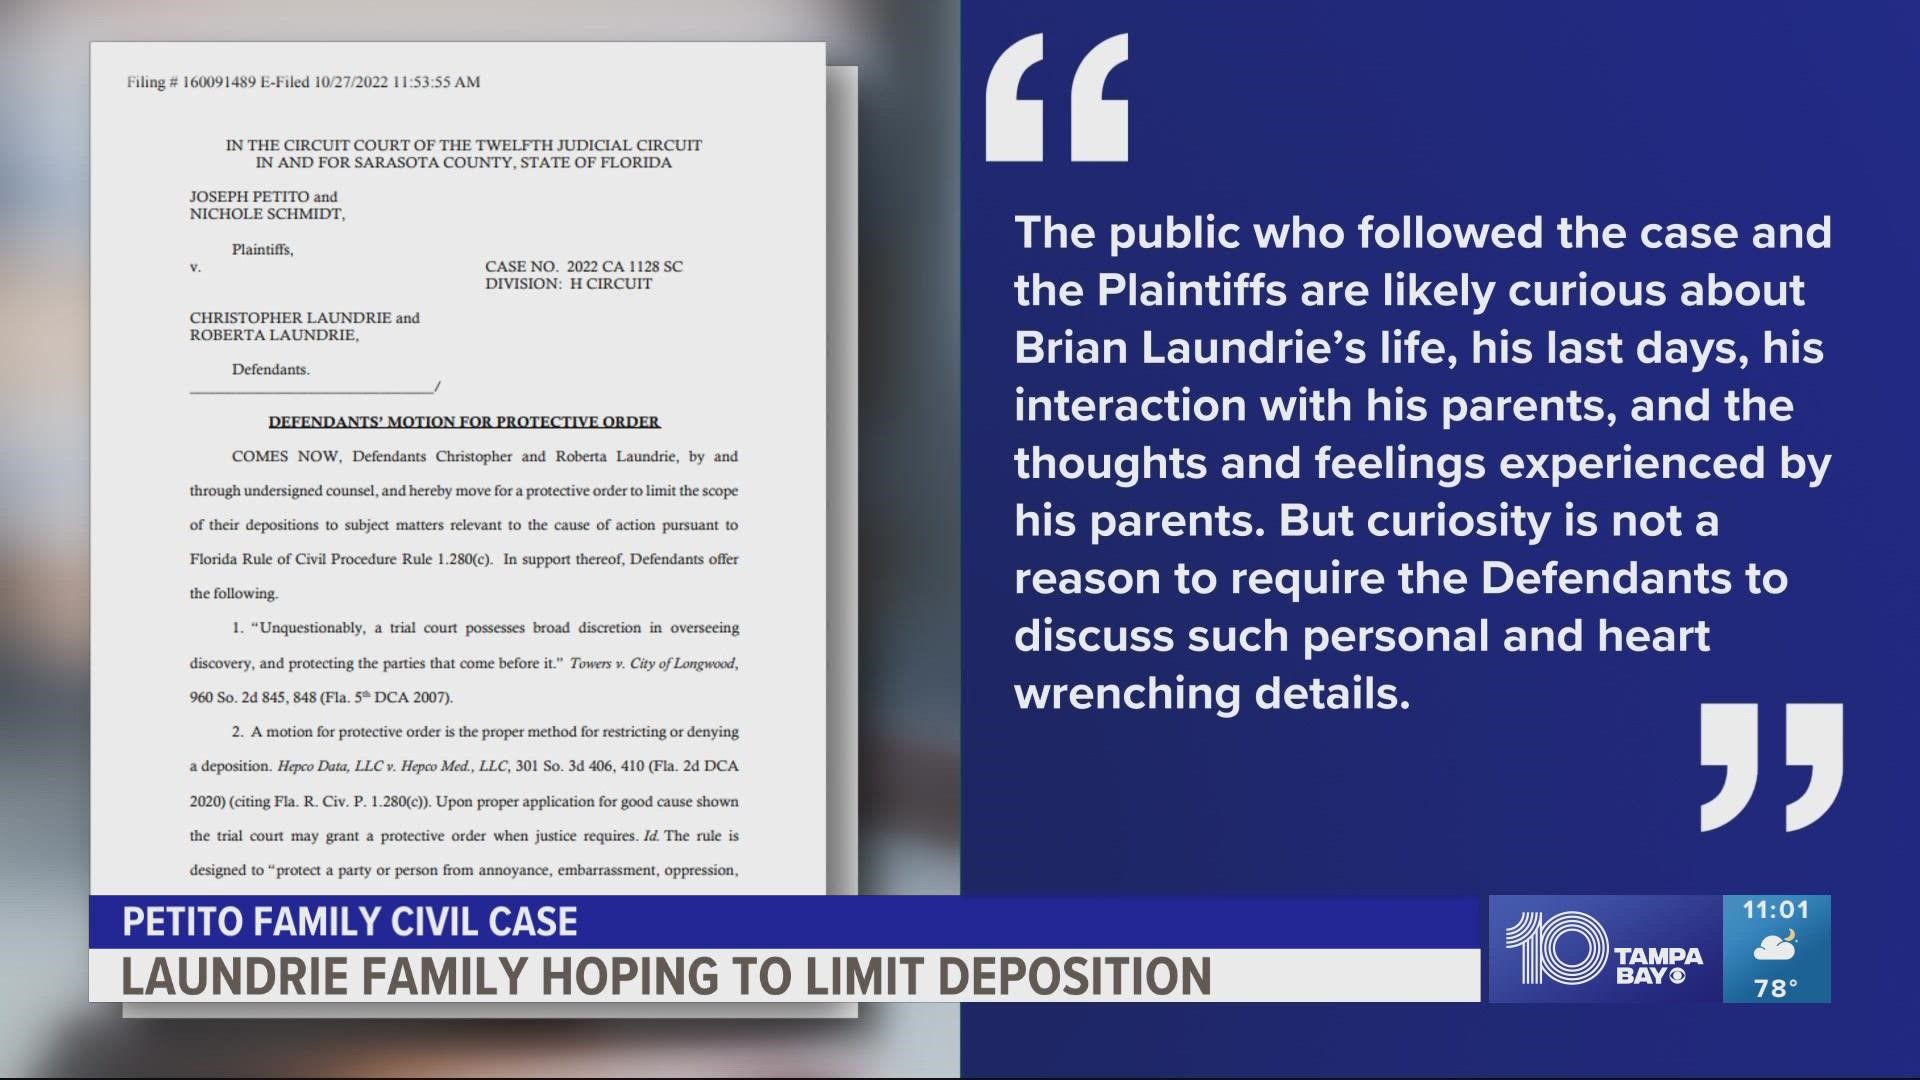 Attorneys for Christopher and Roberta Laundrie are requesting protection from being deposed about details of their personal lives that are irrelevant to the case.